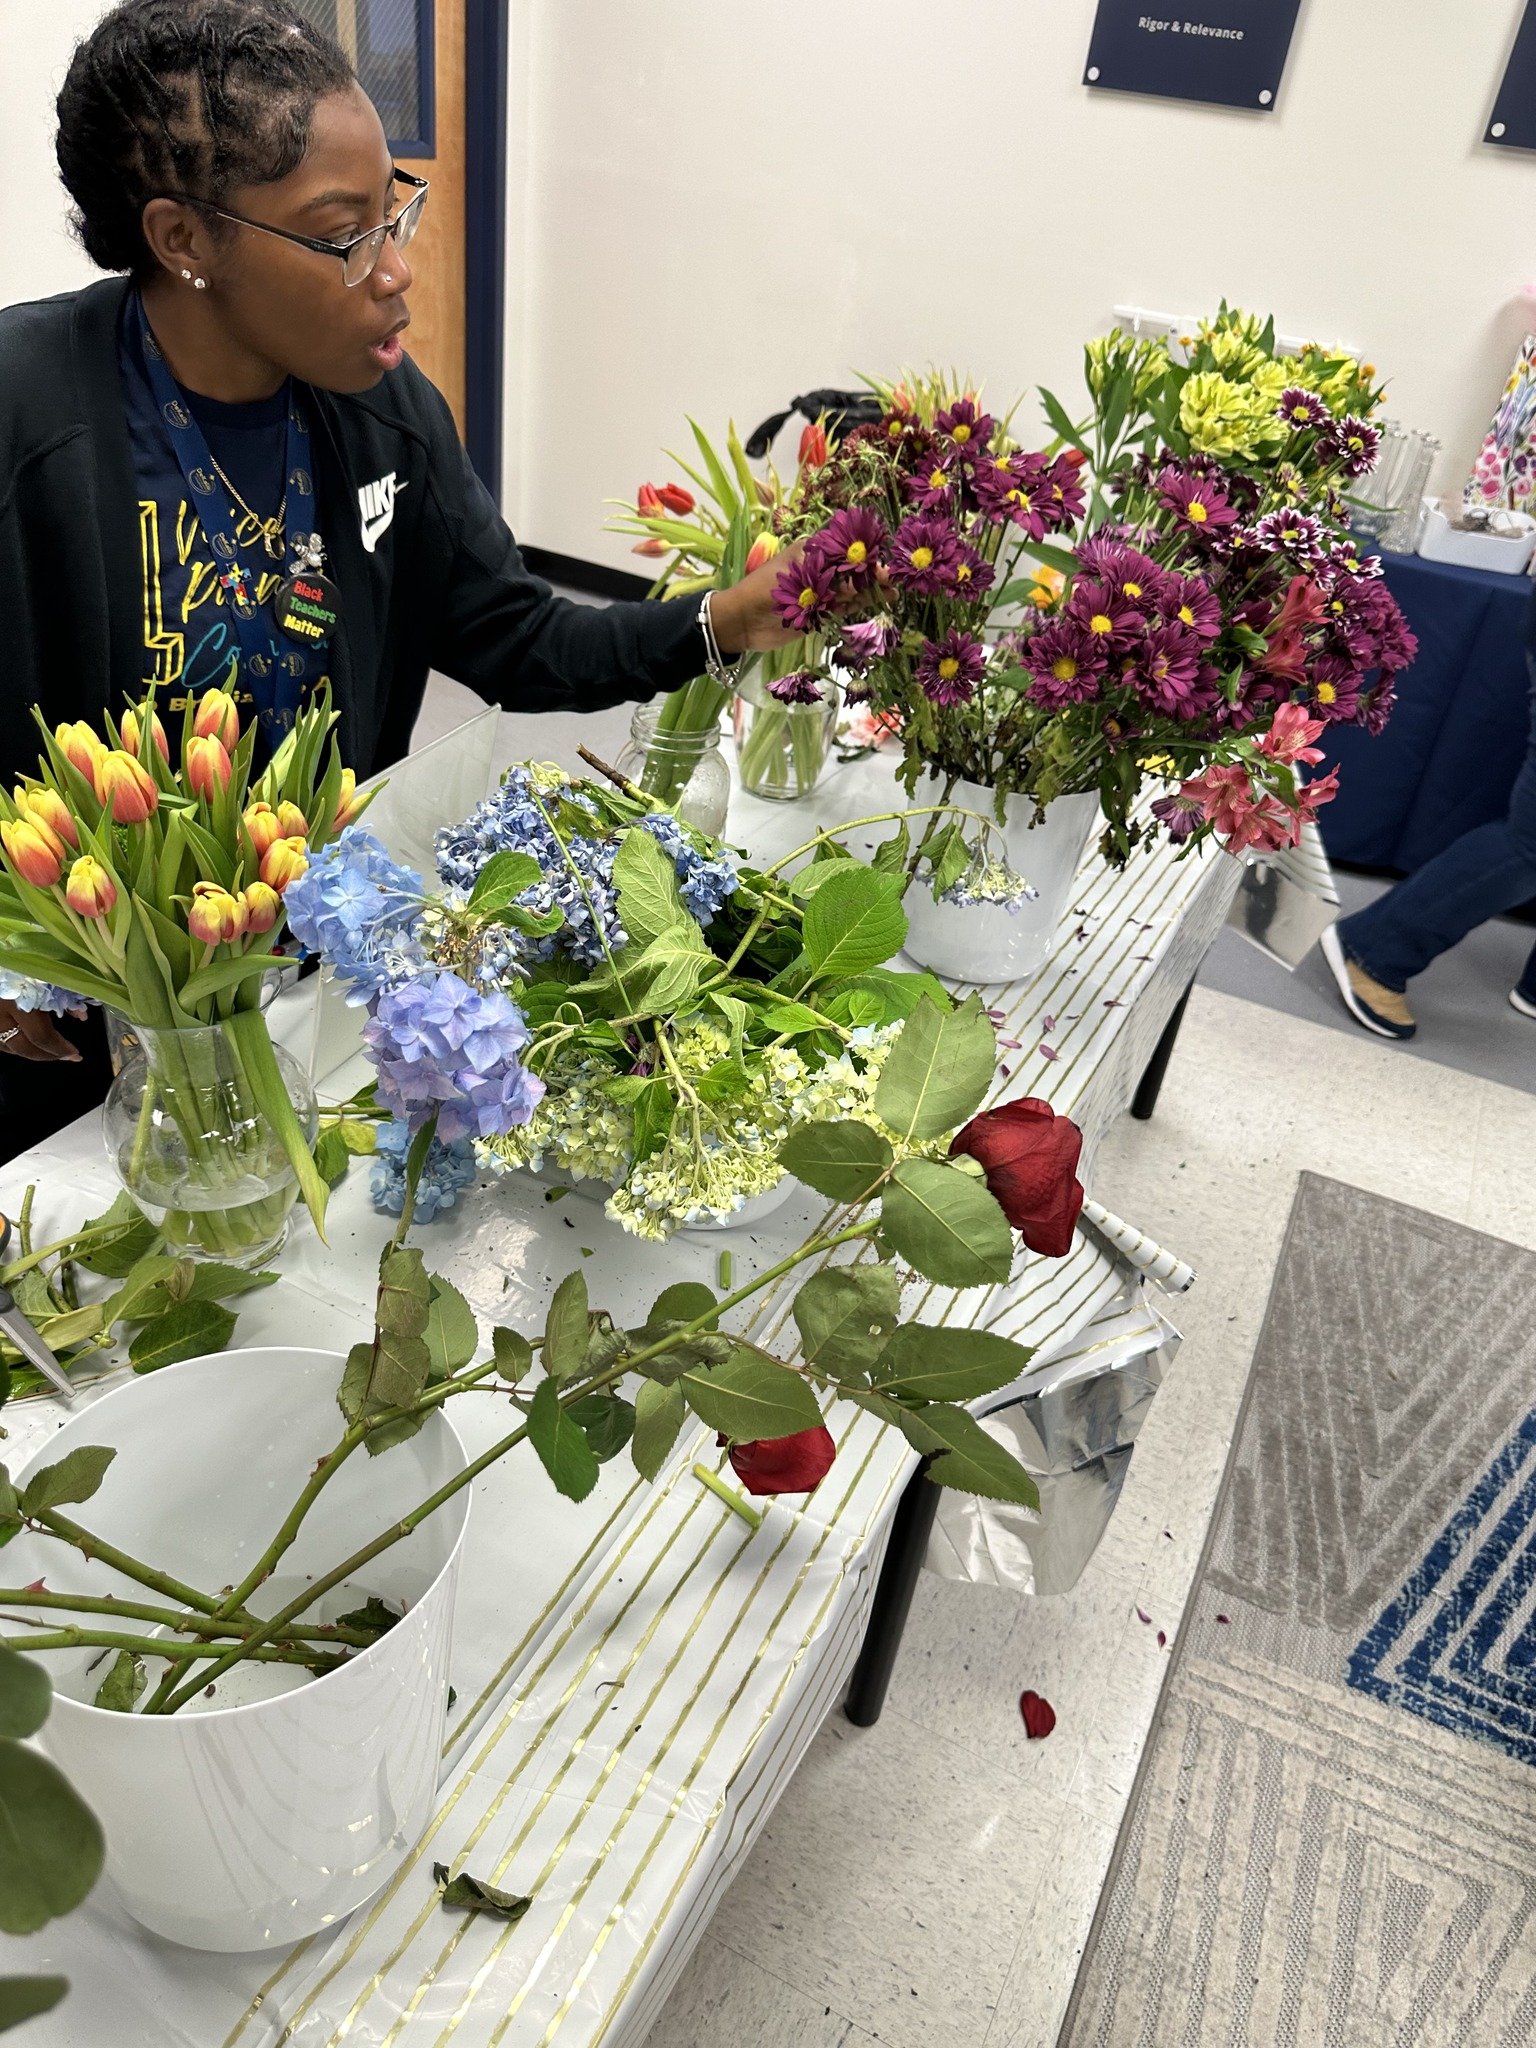 Let's bloom with gratitude! 🌼✨ Our DBA teachers kicked off their week of celebration by crafting beautiful flower bouquets as tokens of our appreciation. 🌺🎉 Here's to the incredible educators who nurture minds and hearts every day! #TeacherAppreci